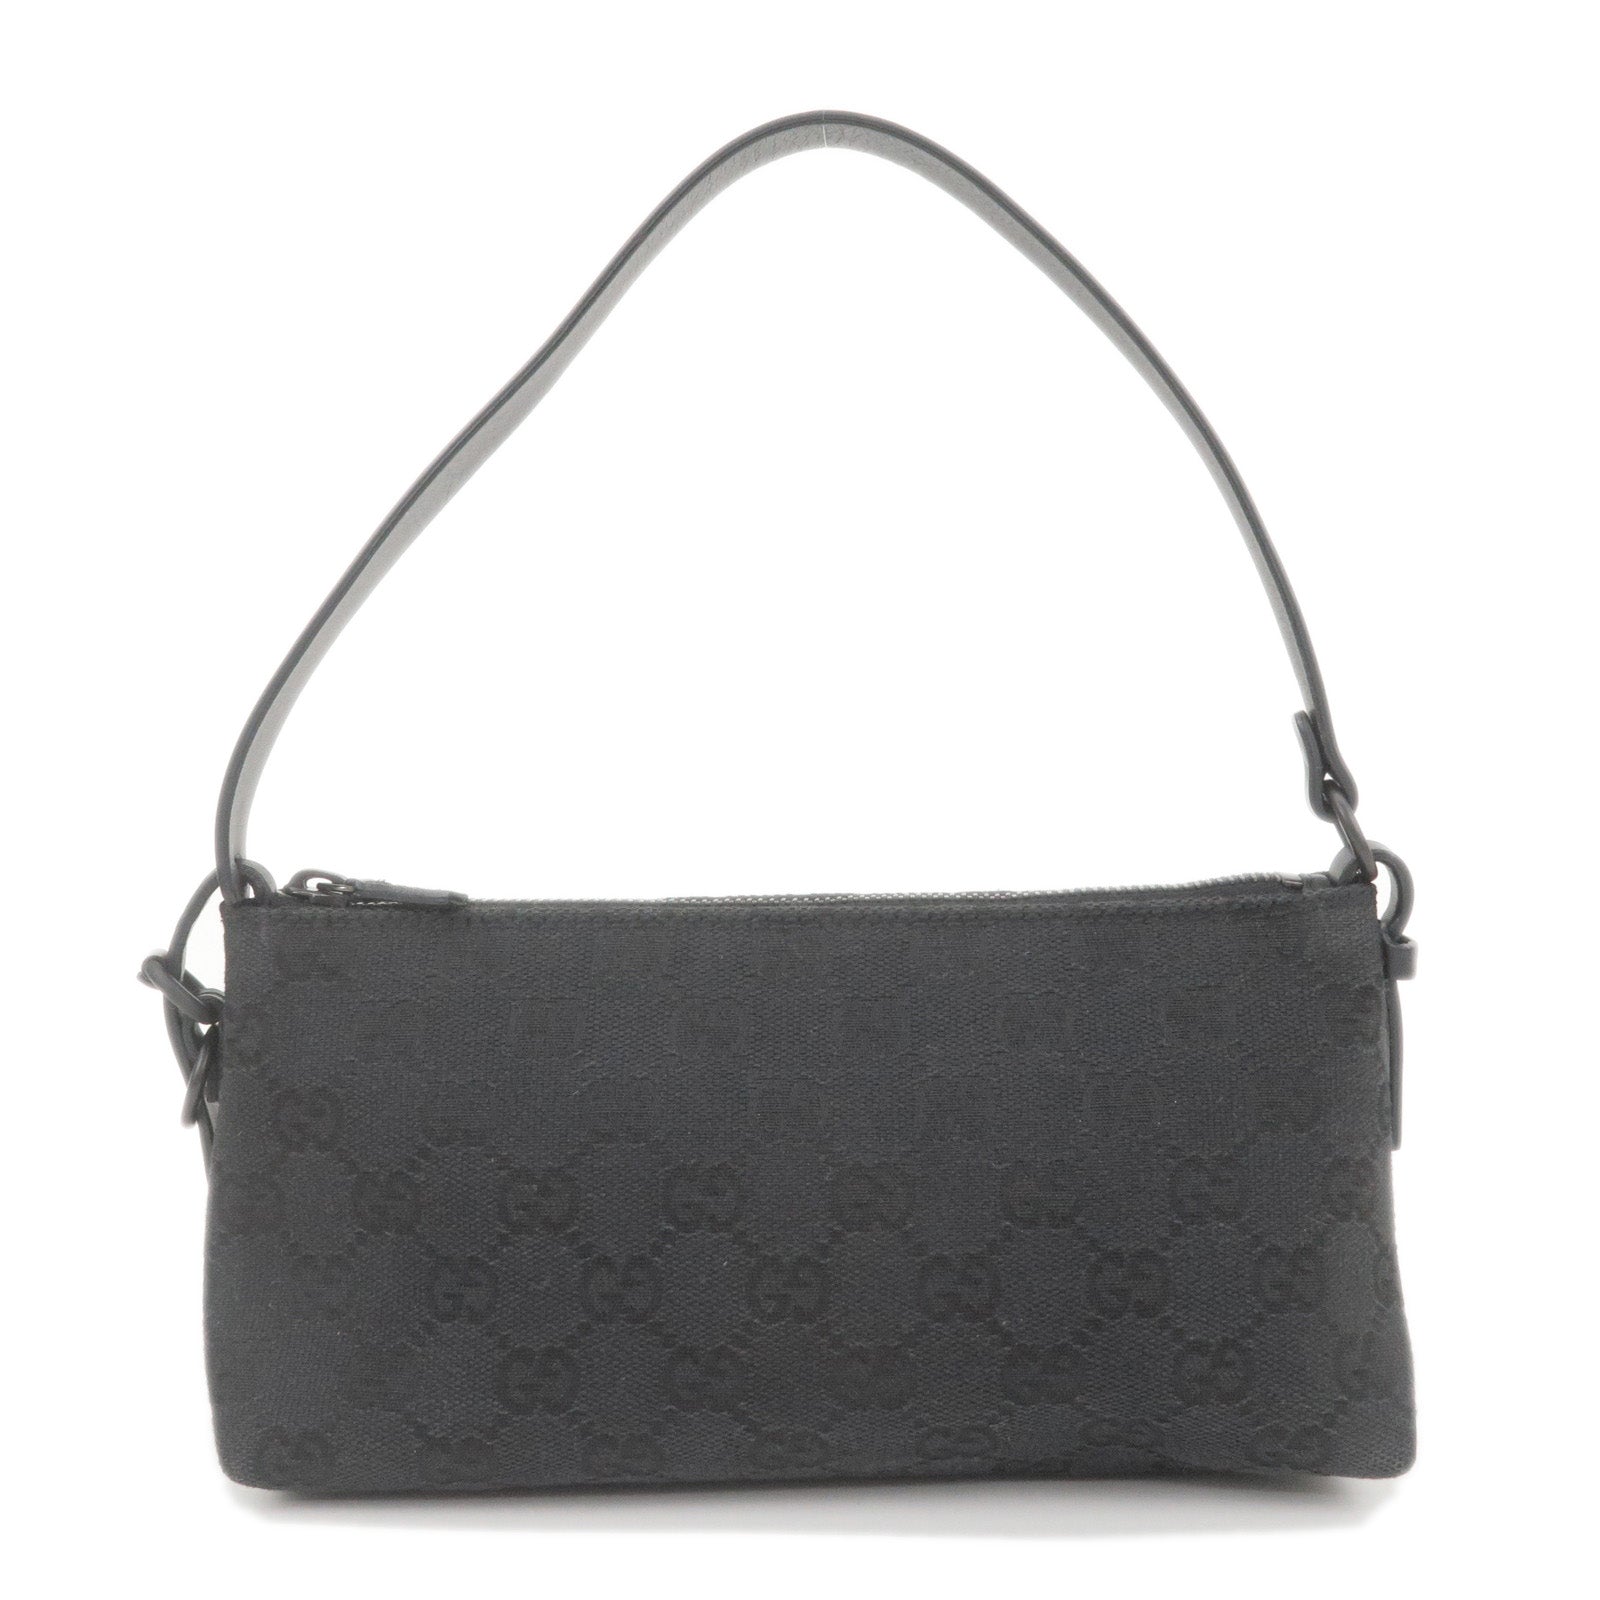 GUCCI-GG-Canvas-Leather-Purse-Pouch-Hand-Bag-Black-103399 – dct